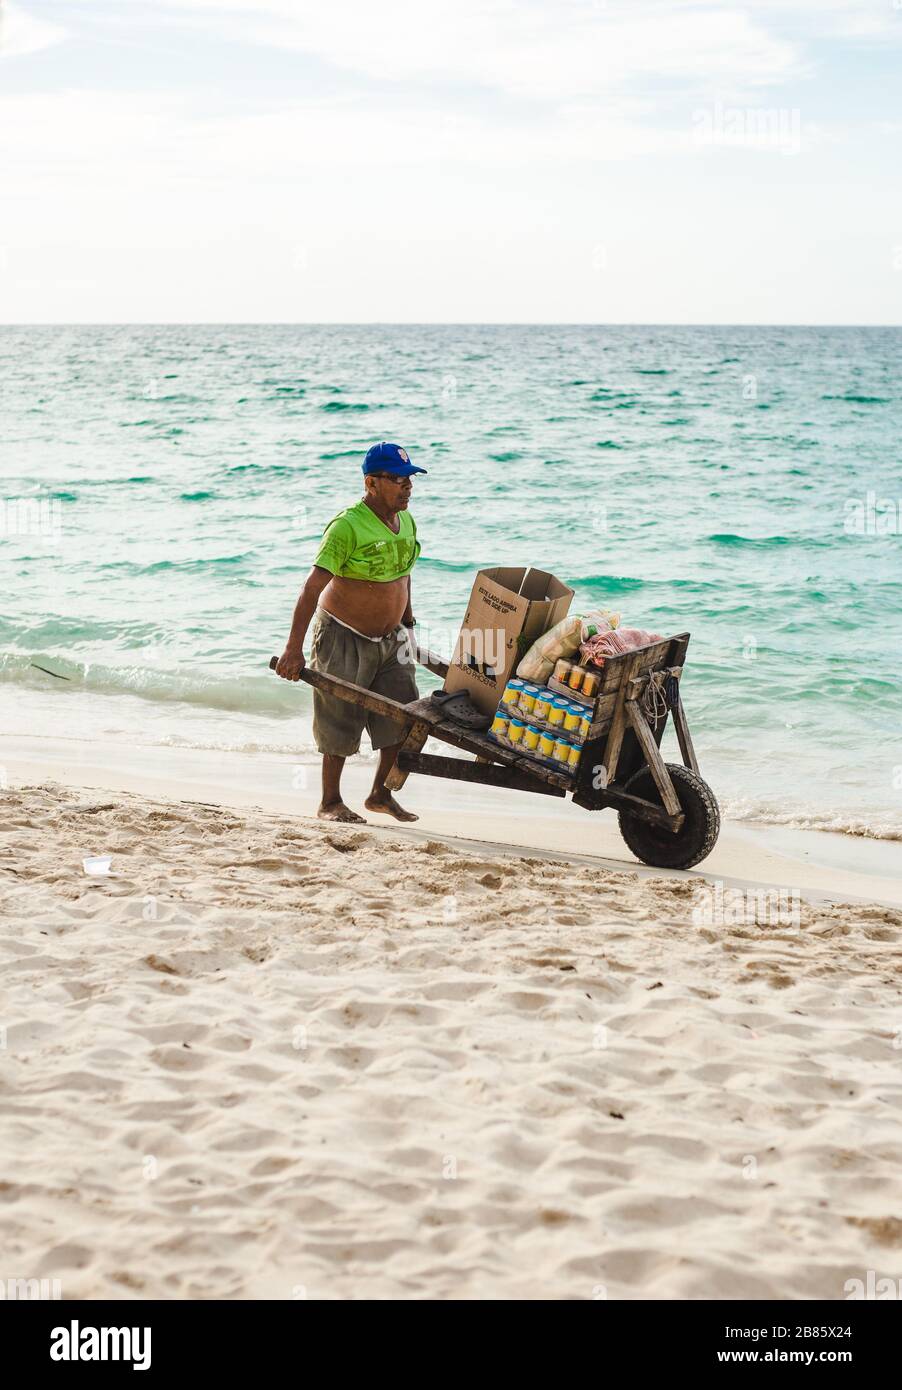 Local Colombian vendor sells drinks in cans from his wheelbarrow on the beach of Isla Baru, near Cartagena, Colombia Stock Photo